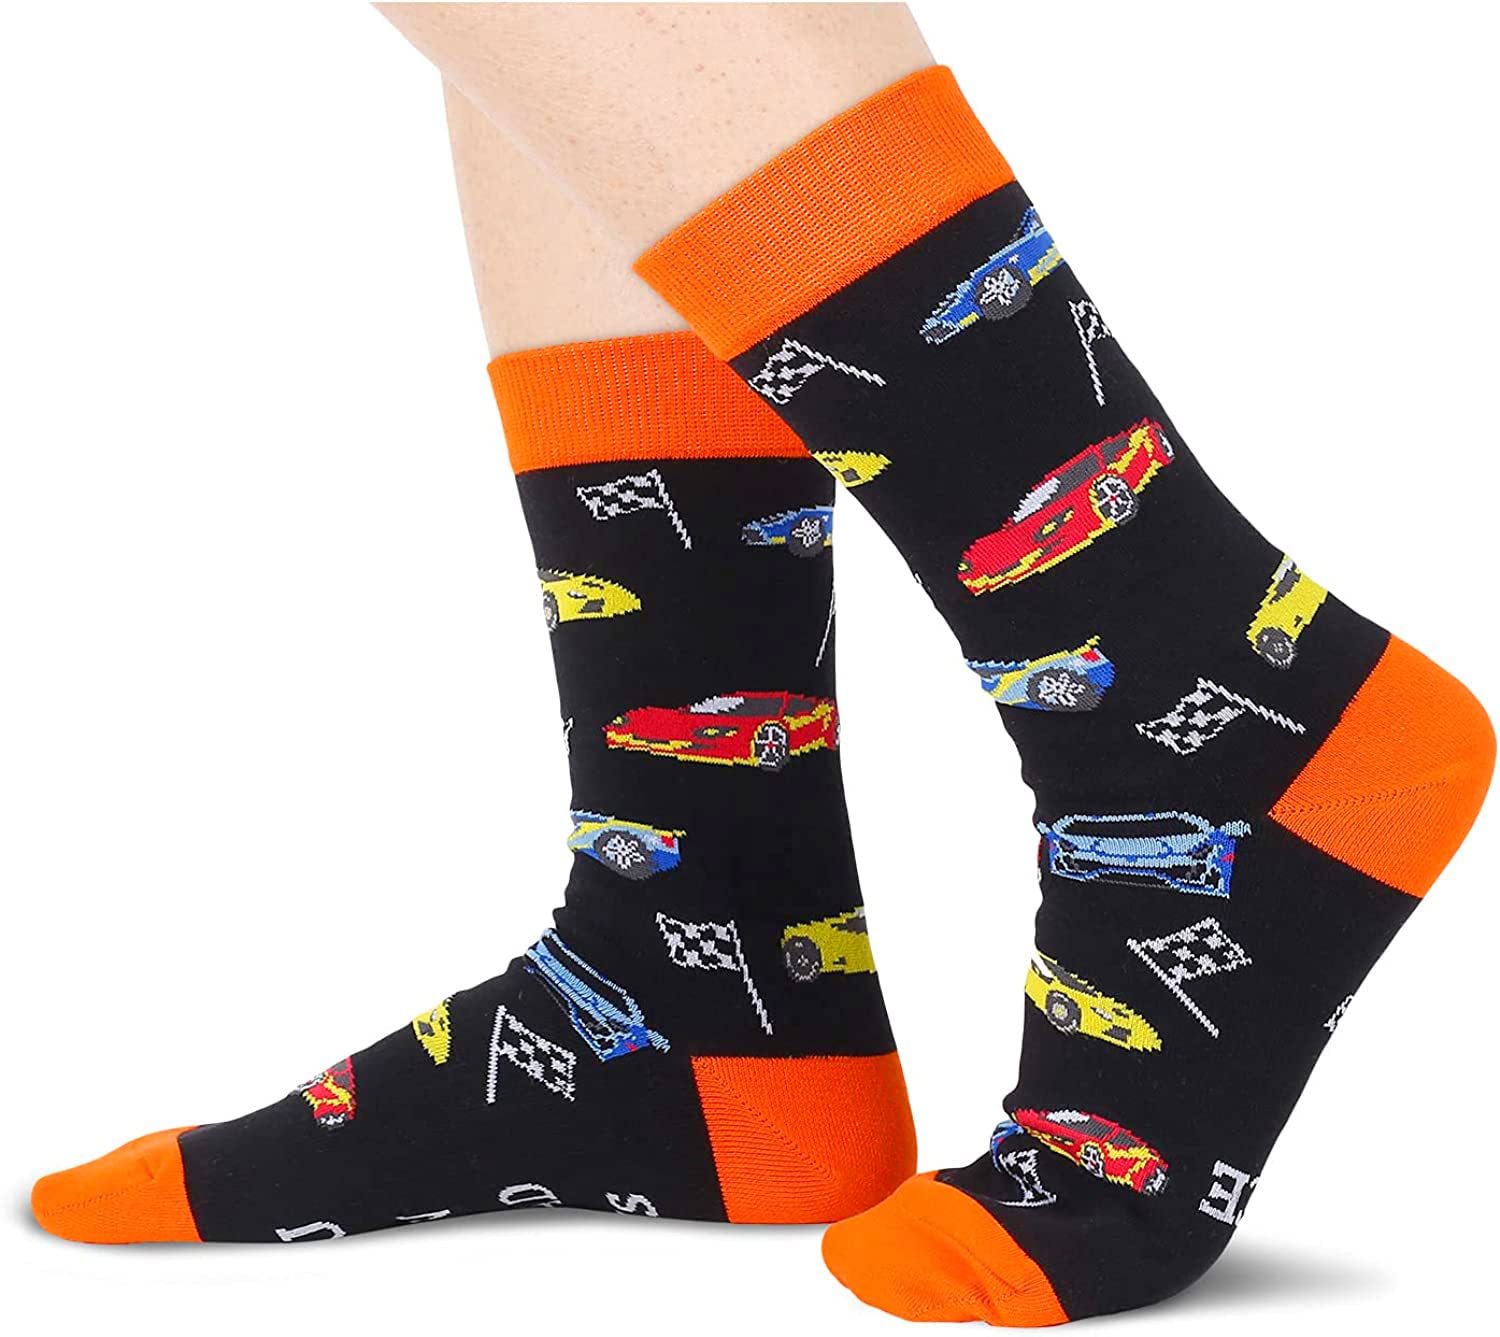 Zmart Drag Racing Gifts, Gifts For Car Lovers Guys, Funny Racing Car Gifts For Men, Vintage Cool Old Race Car Socks For Men